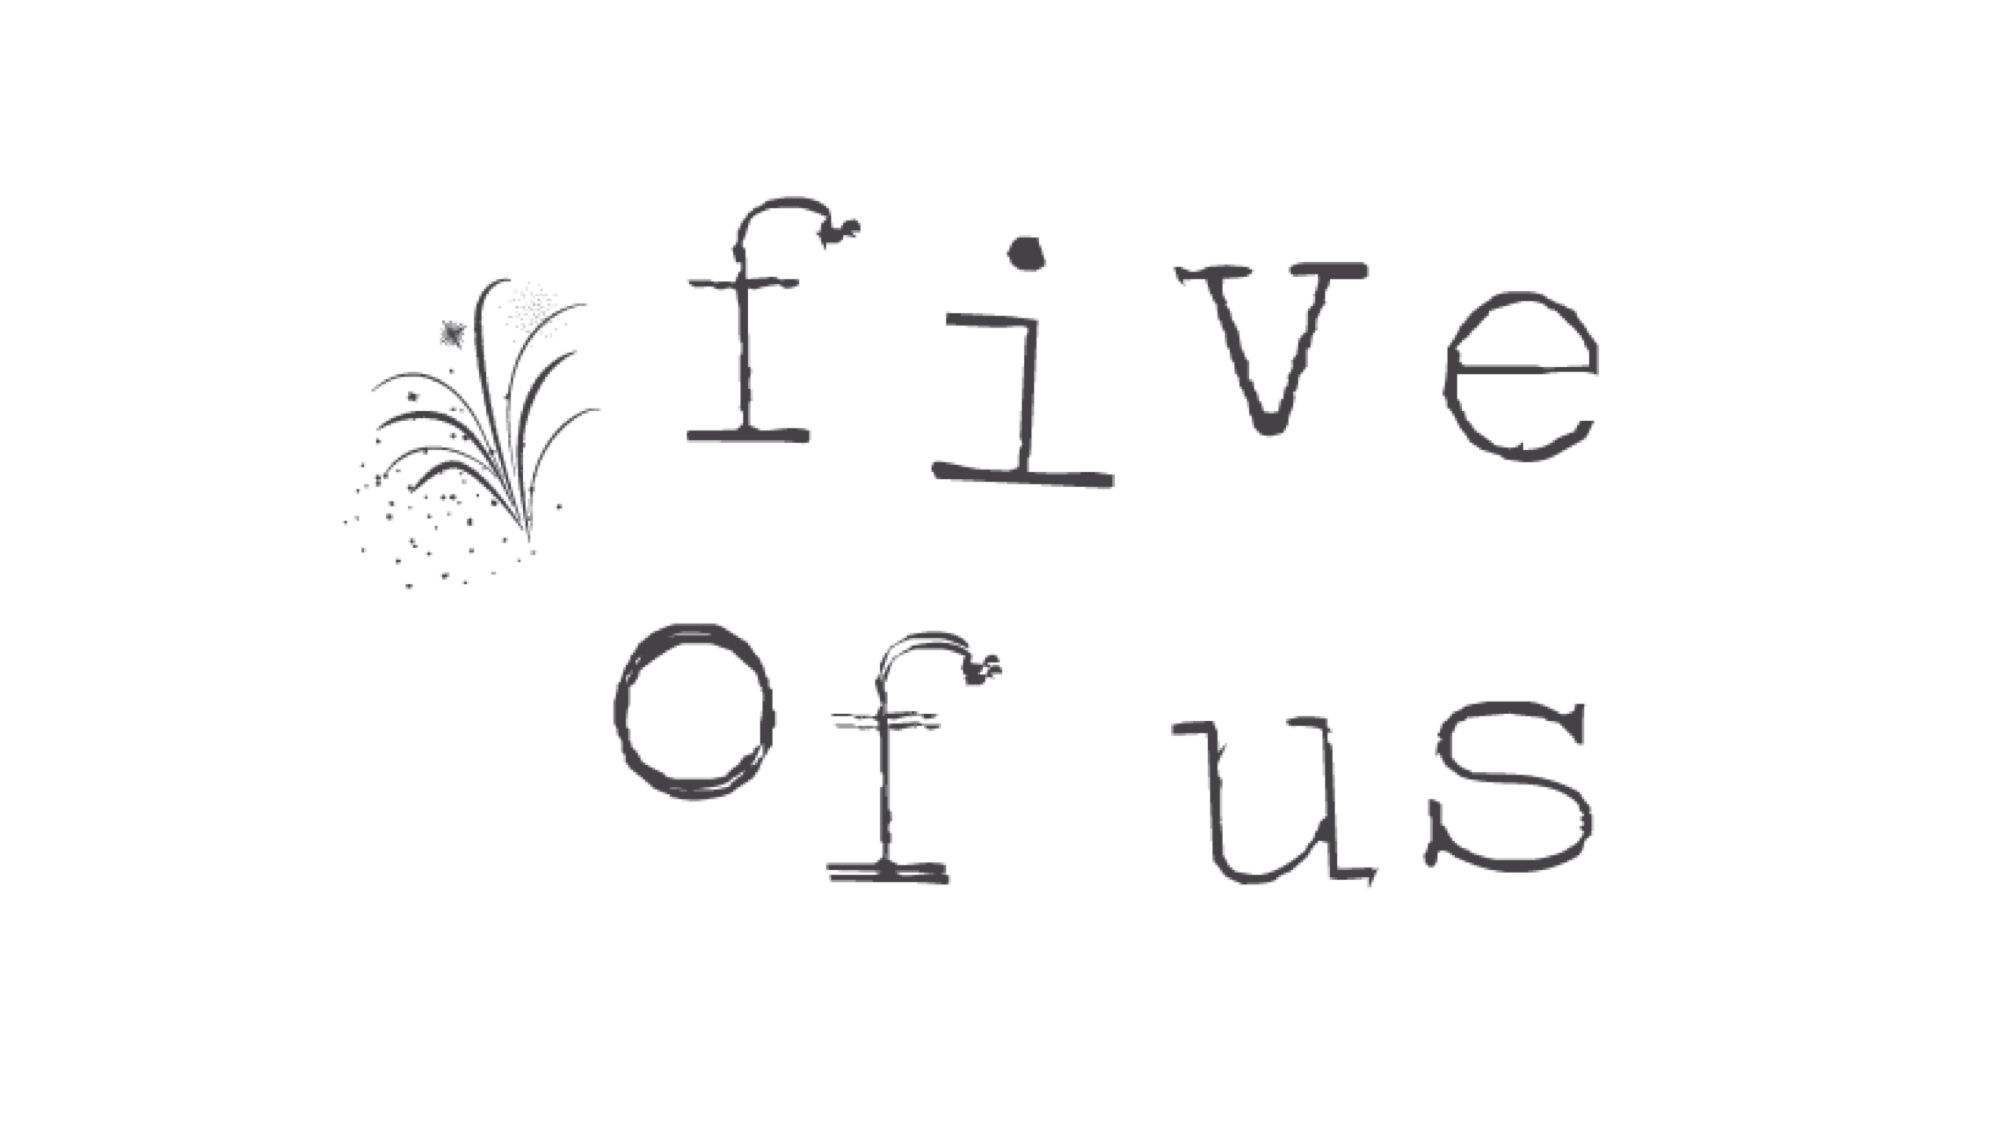 Five of Us